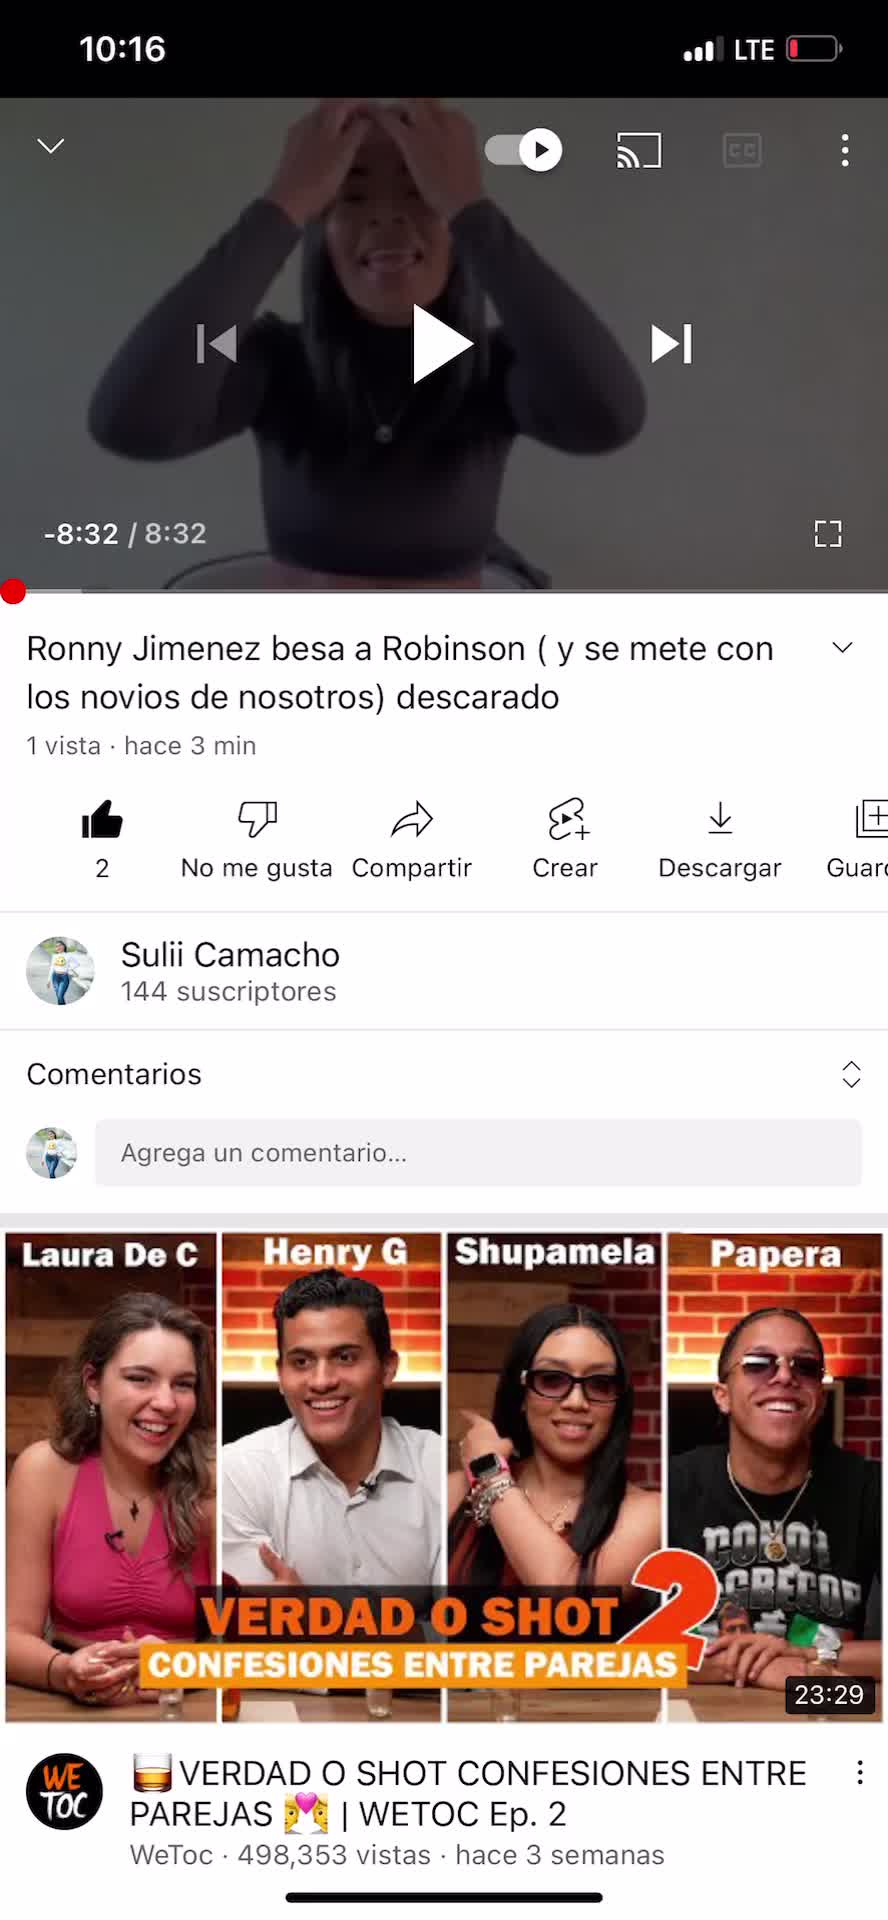 One of the top publications of @suliicamacho17 which has 1.9K likes and 17 comments